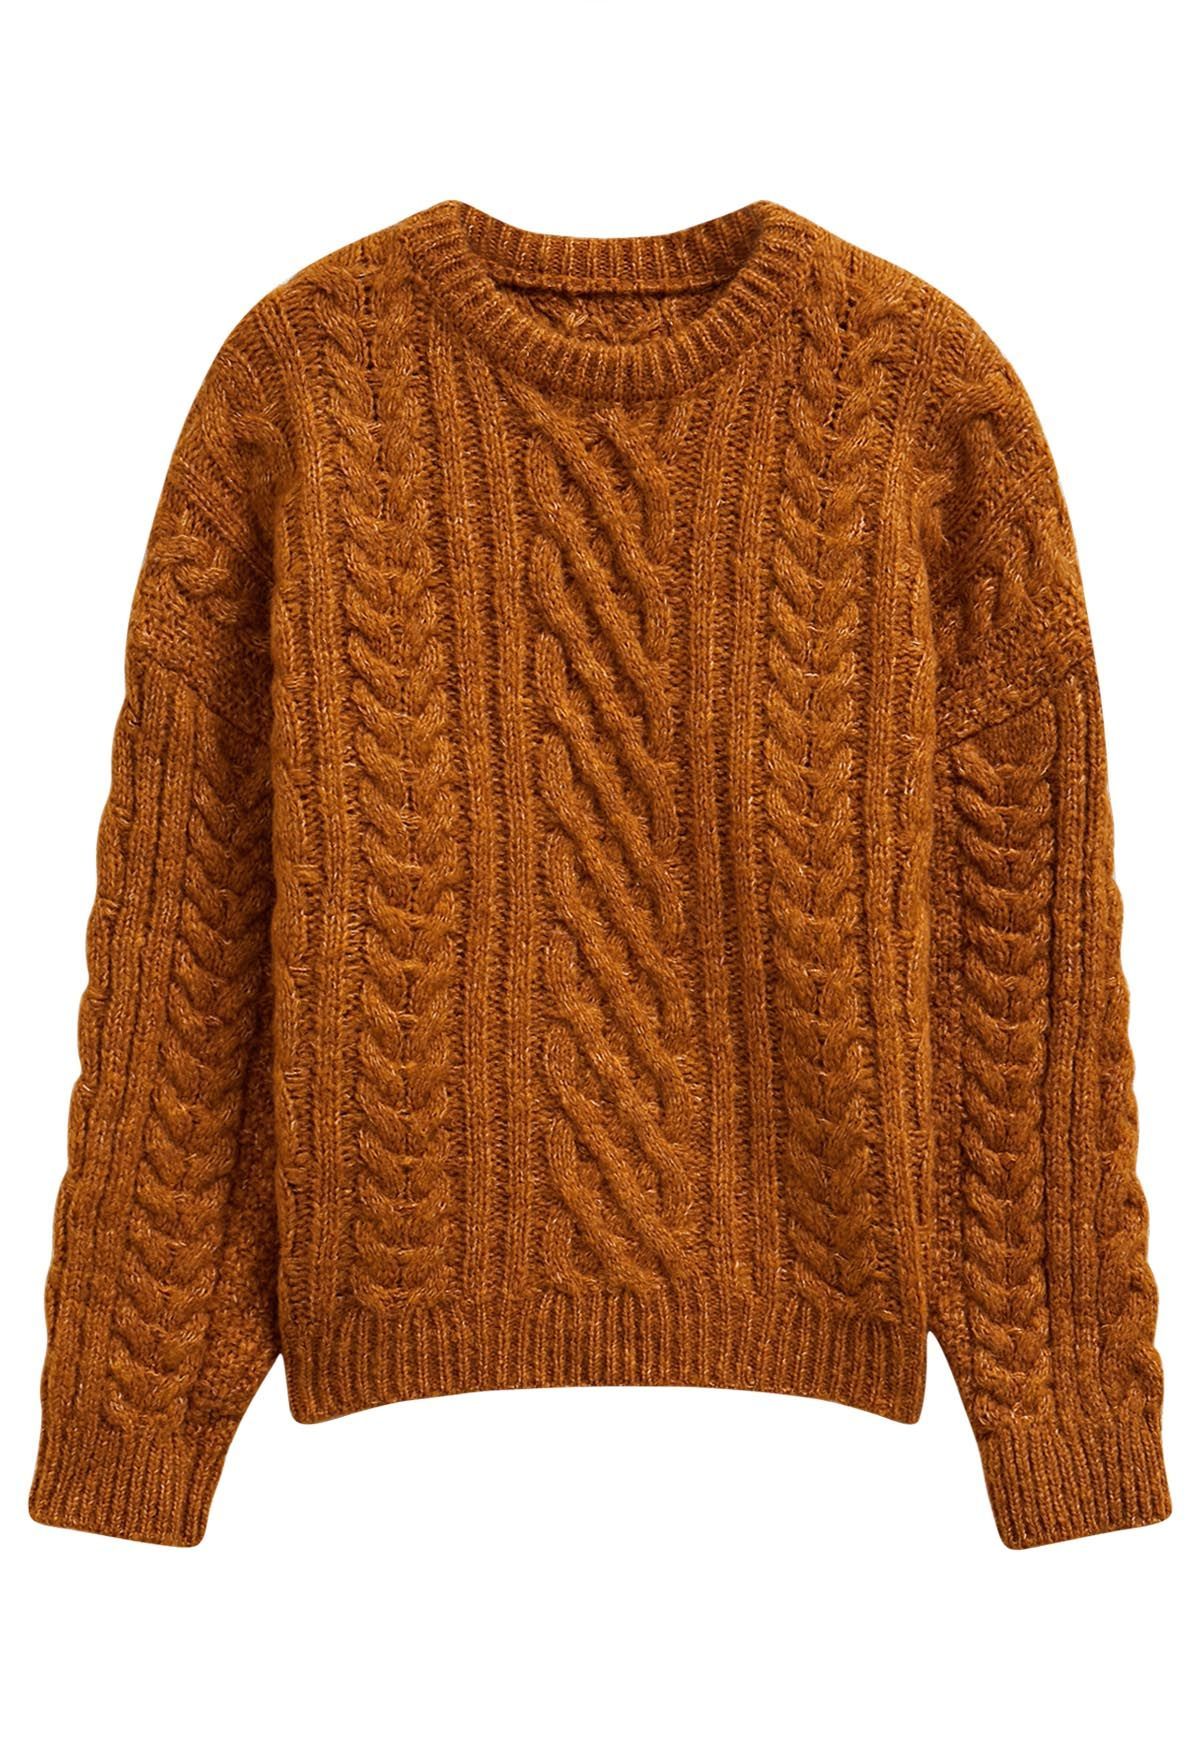 Back To Cozy Cable Knit Sweater in Pumpkin | Chicwish